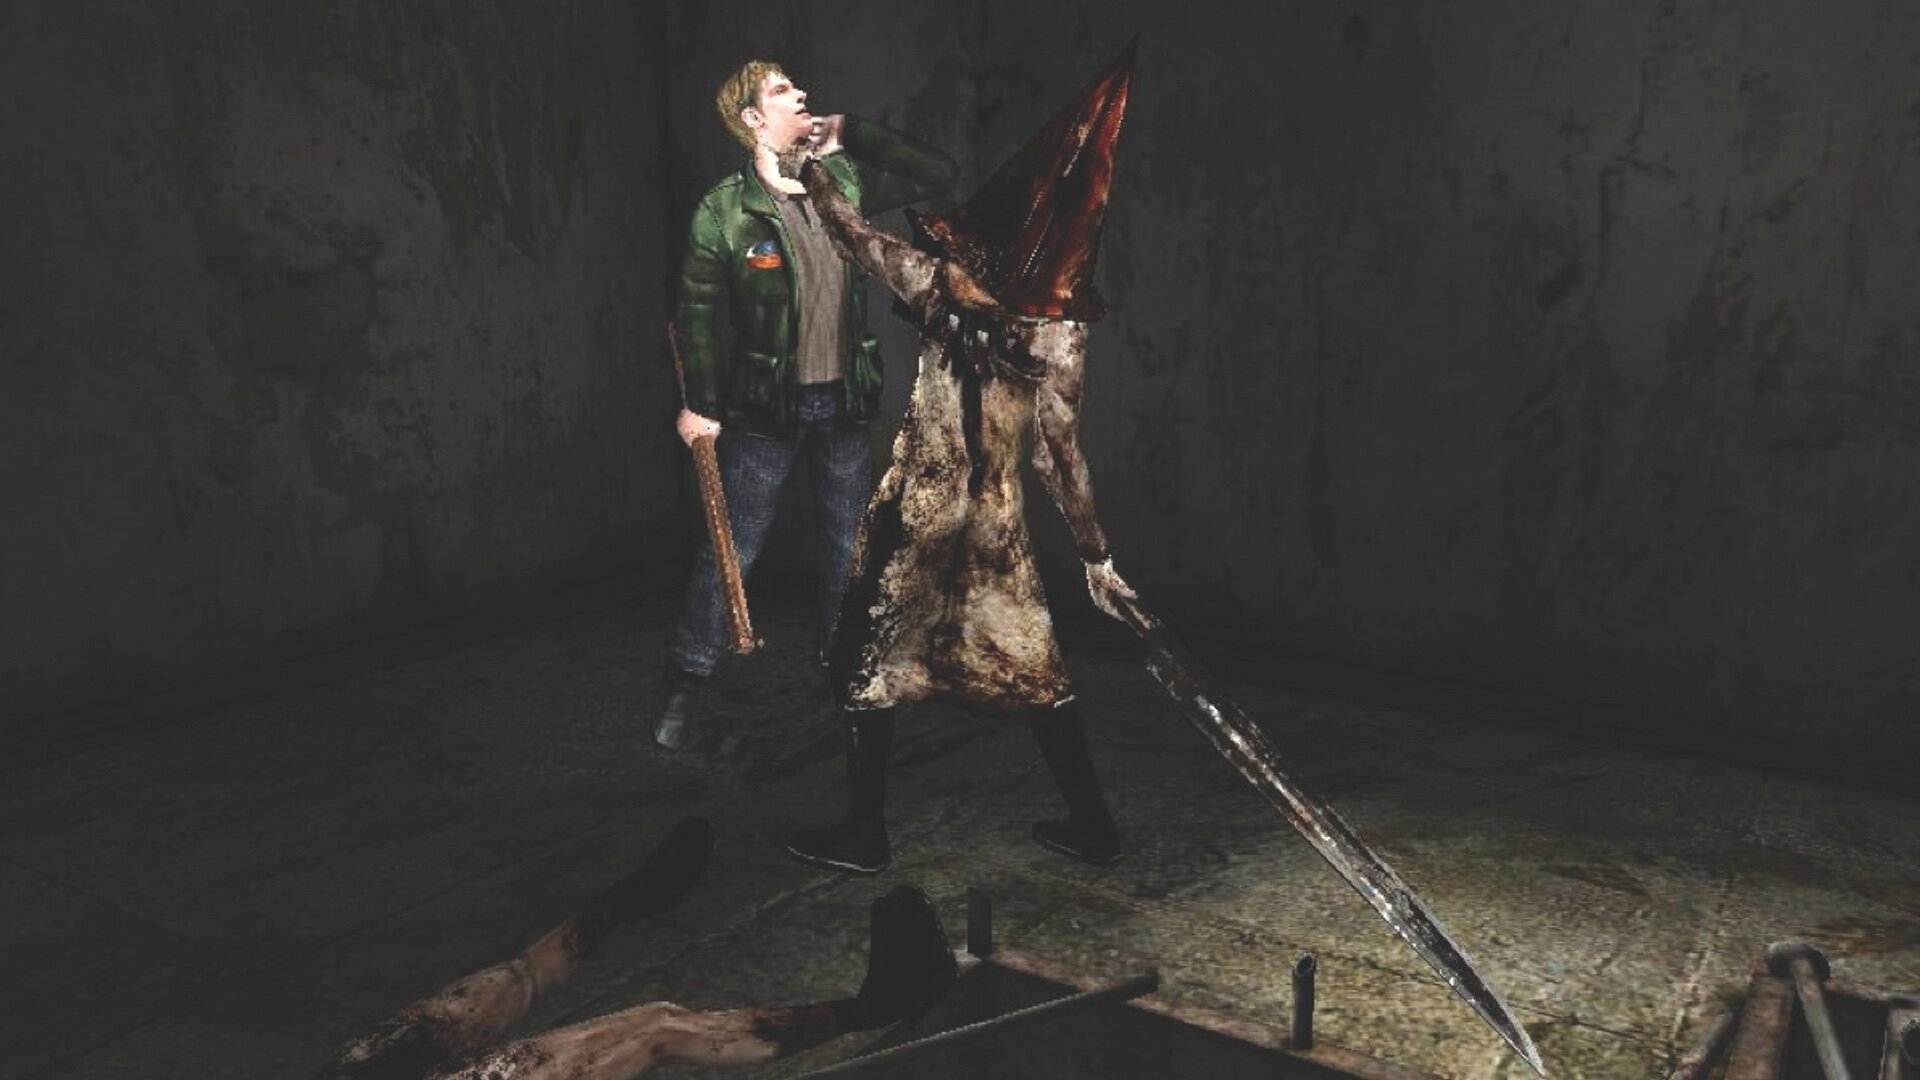 Lost in Silent Hill on X: Silent Hill 2 Remake